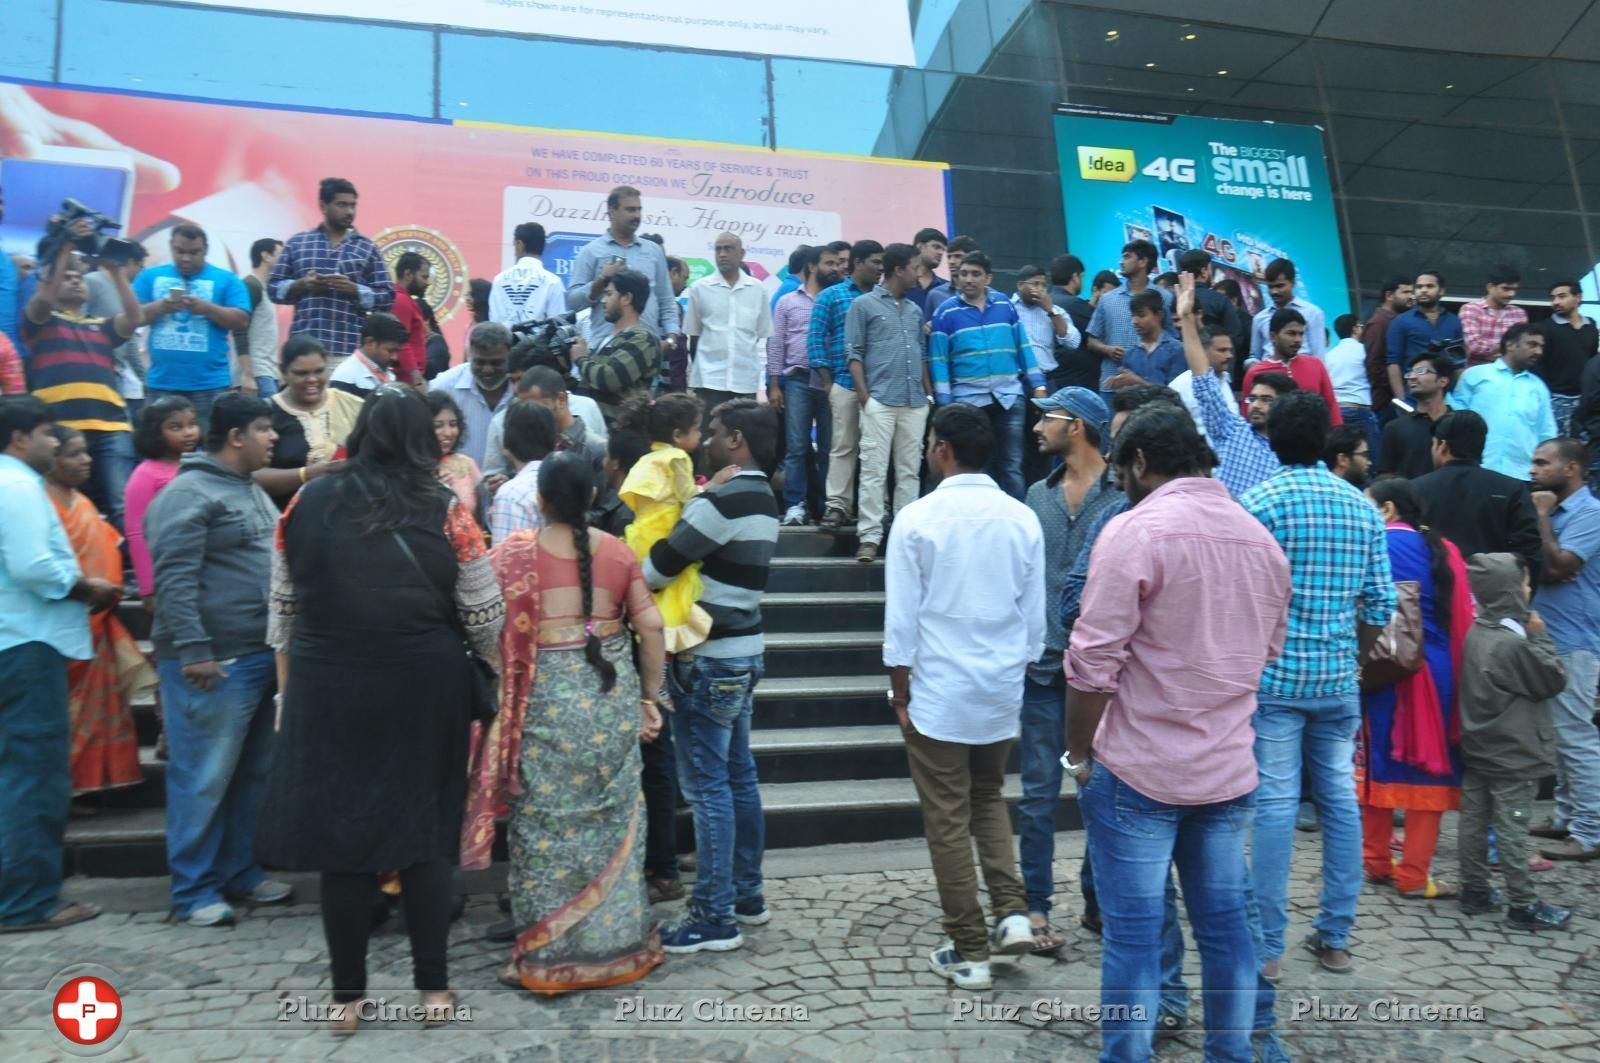 Allu Arjun and Tollywood Celebs in Theater To Watch Khaidi No 150 With Fans Coverage Photos | Picture 1459963